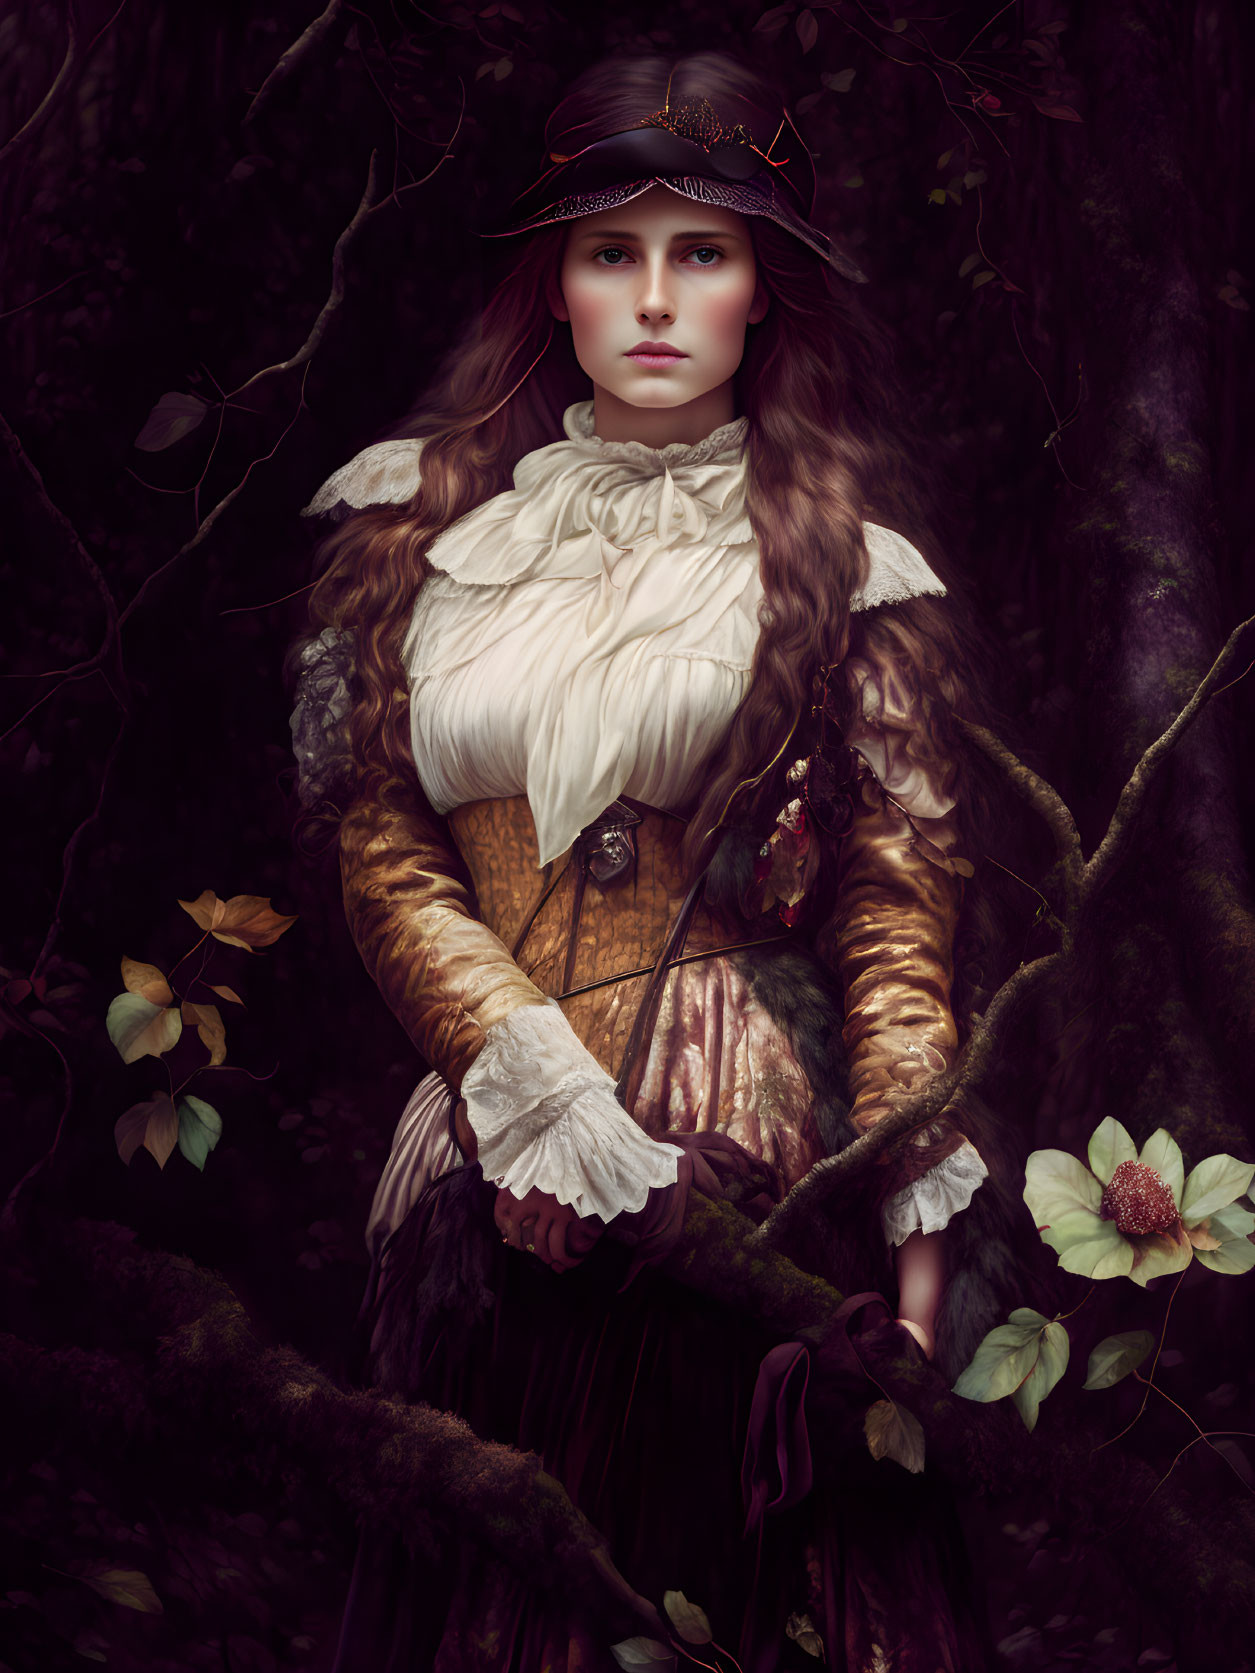 Woman in period clothing in dark enchanted forest with intricate dress details